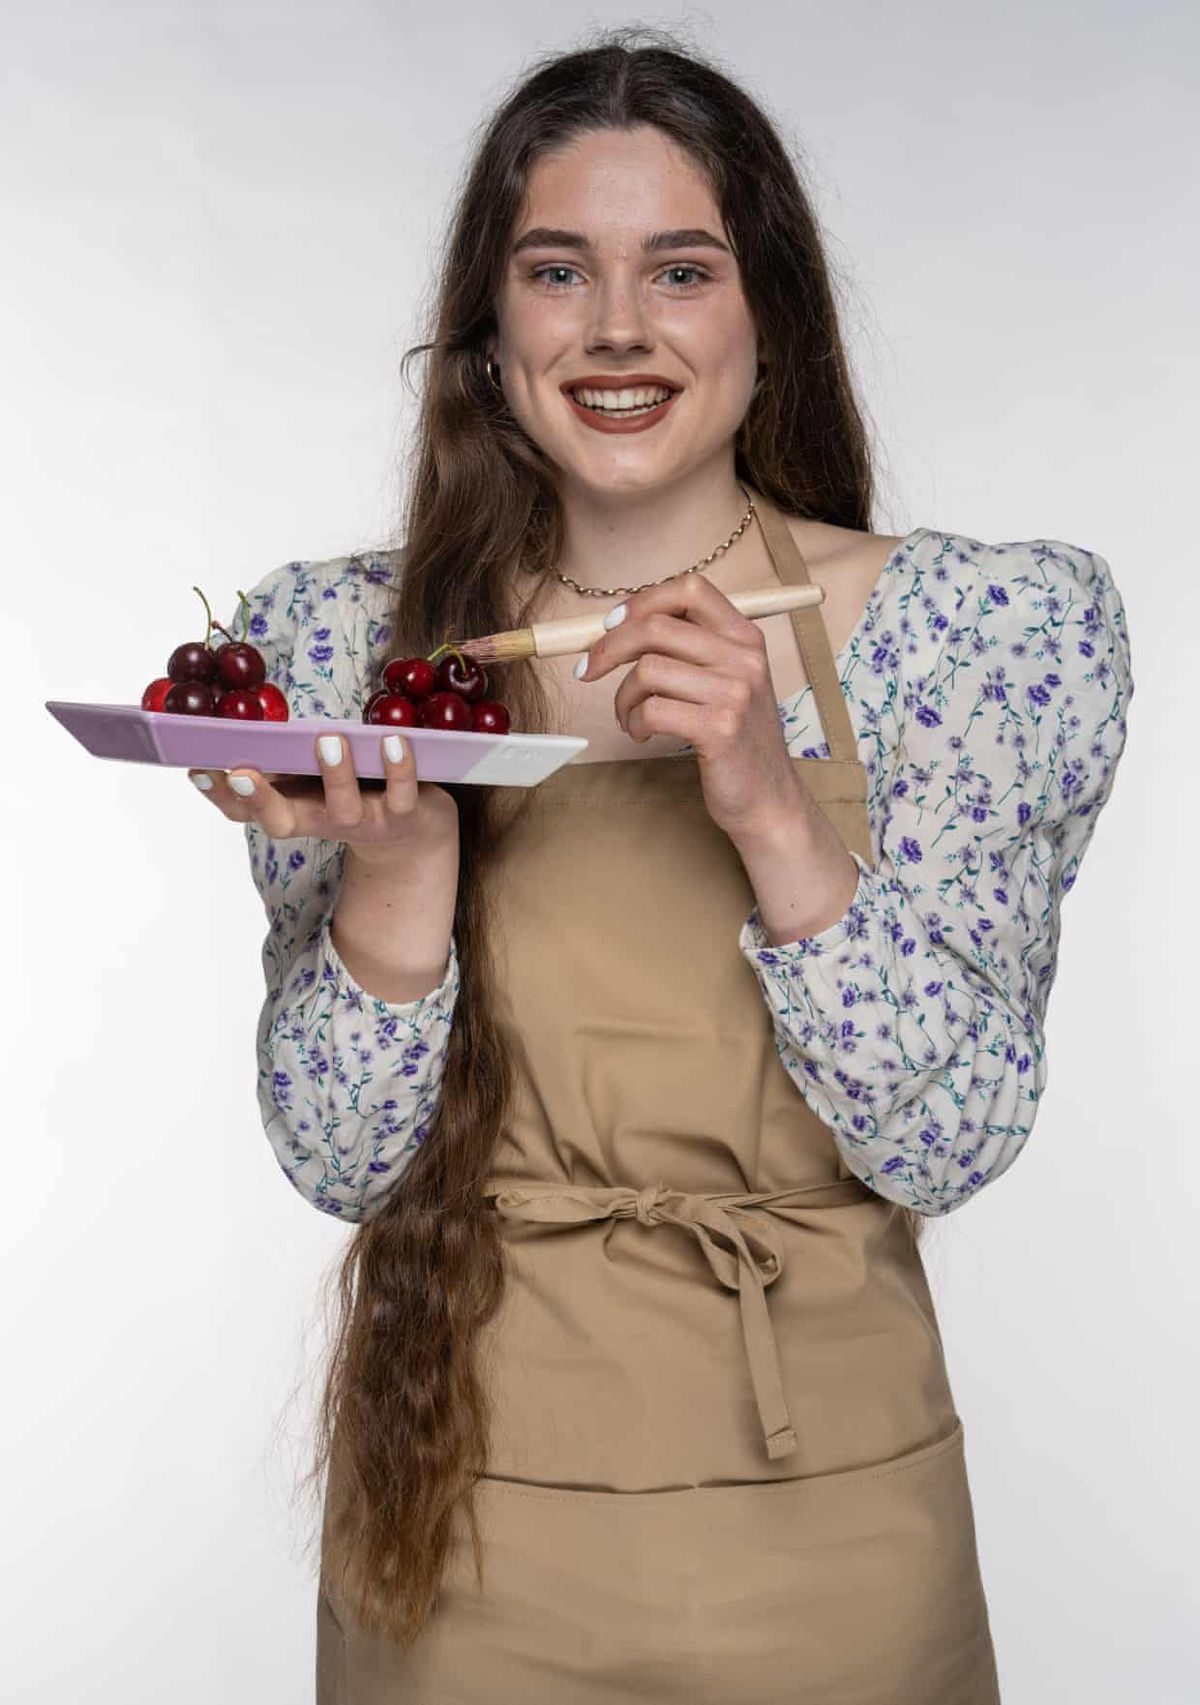 Great British Bake Off 2021 contestant Freya, who will compete on GBBO this year